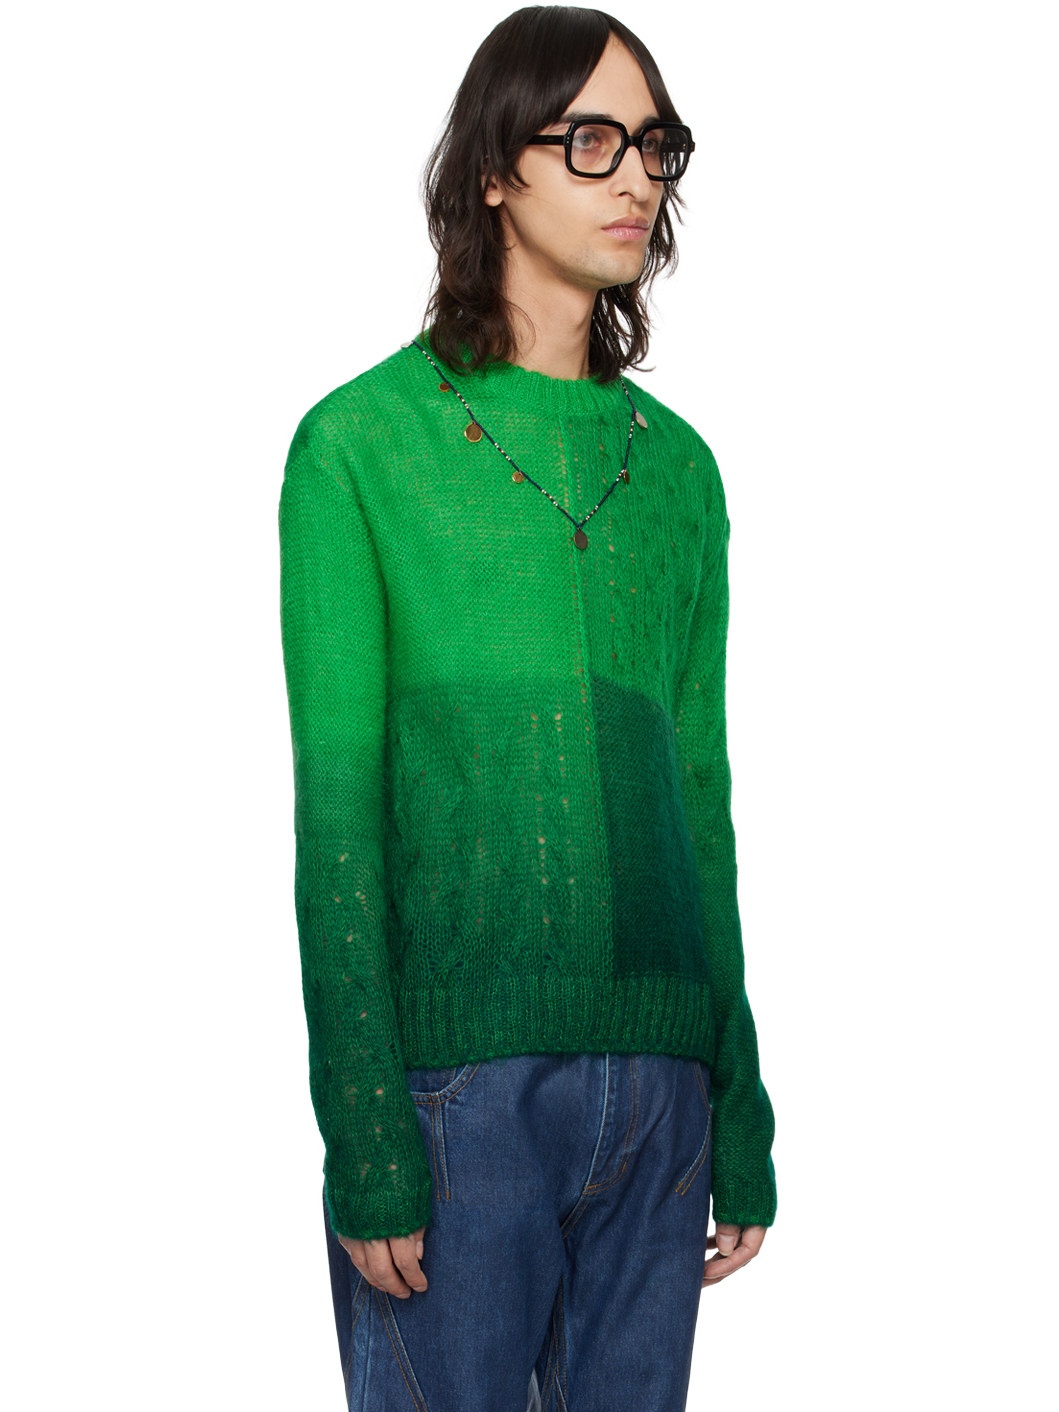 Green Foresk Sweater - 2